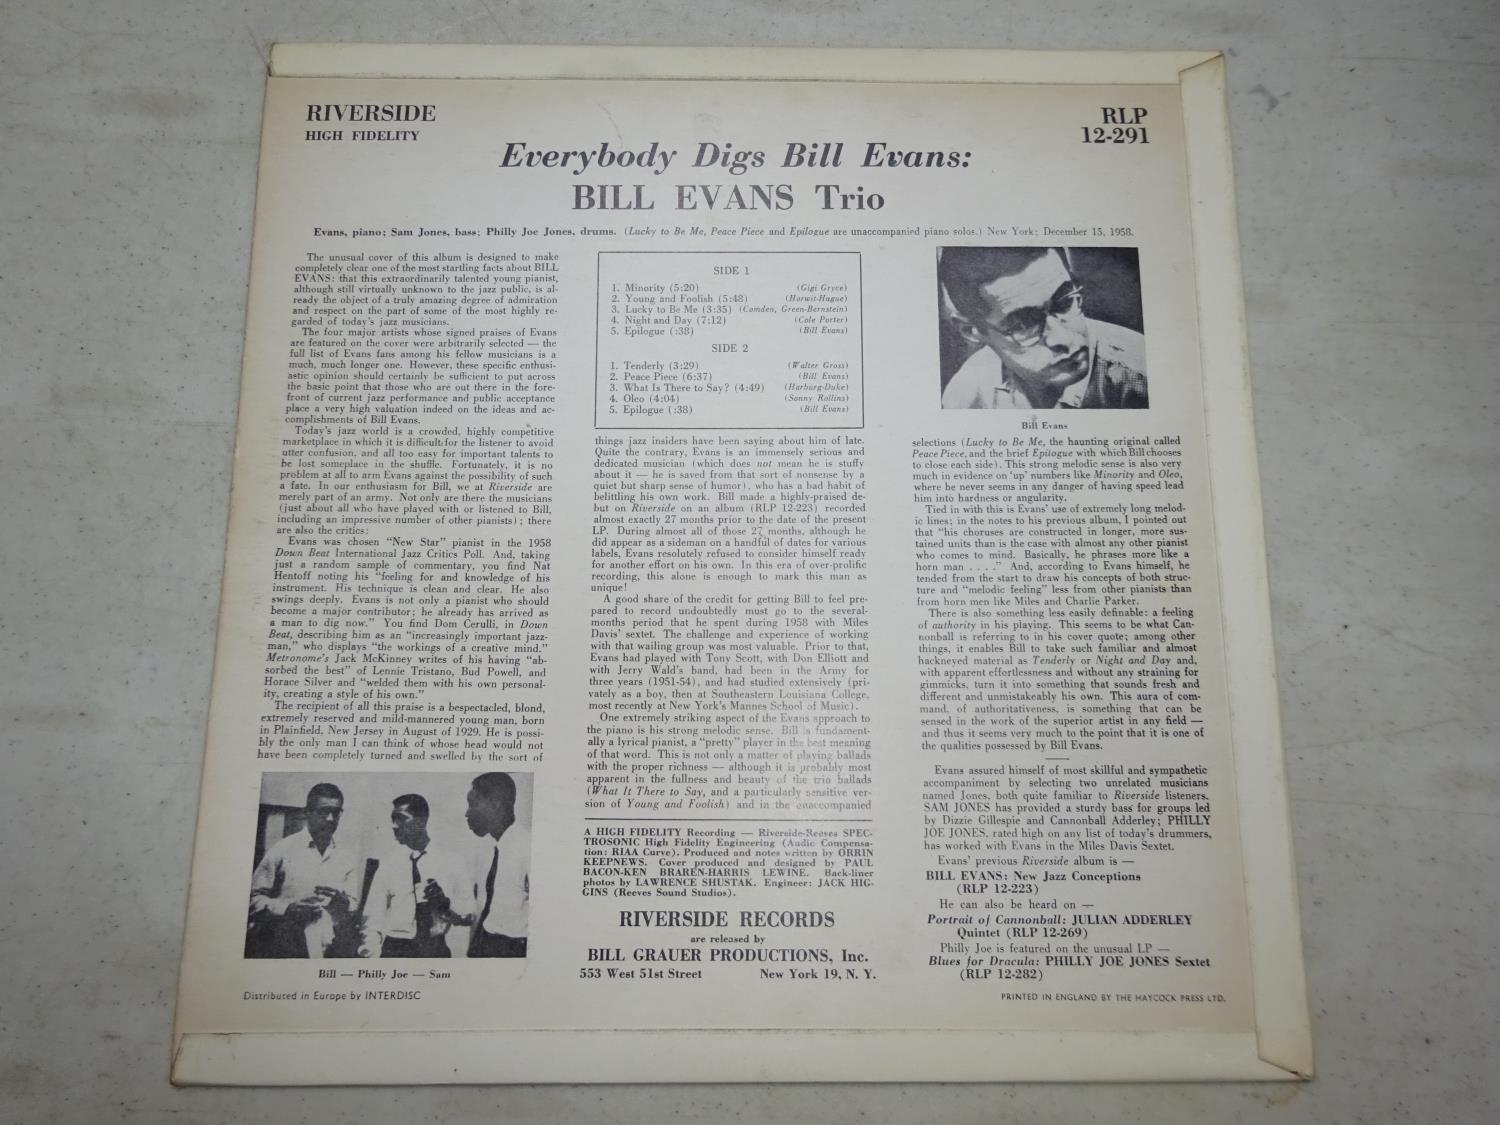 45+ 12" LP records. Including 3x Bill Evans; Dig It!, Portrait in Jazz and Everybody Digs. - Image 9 of 9